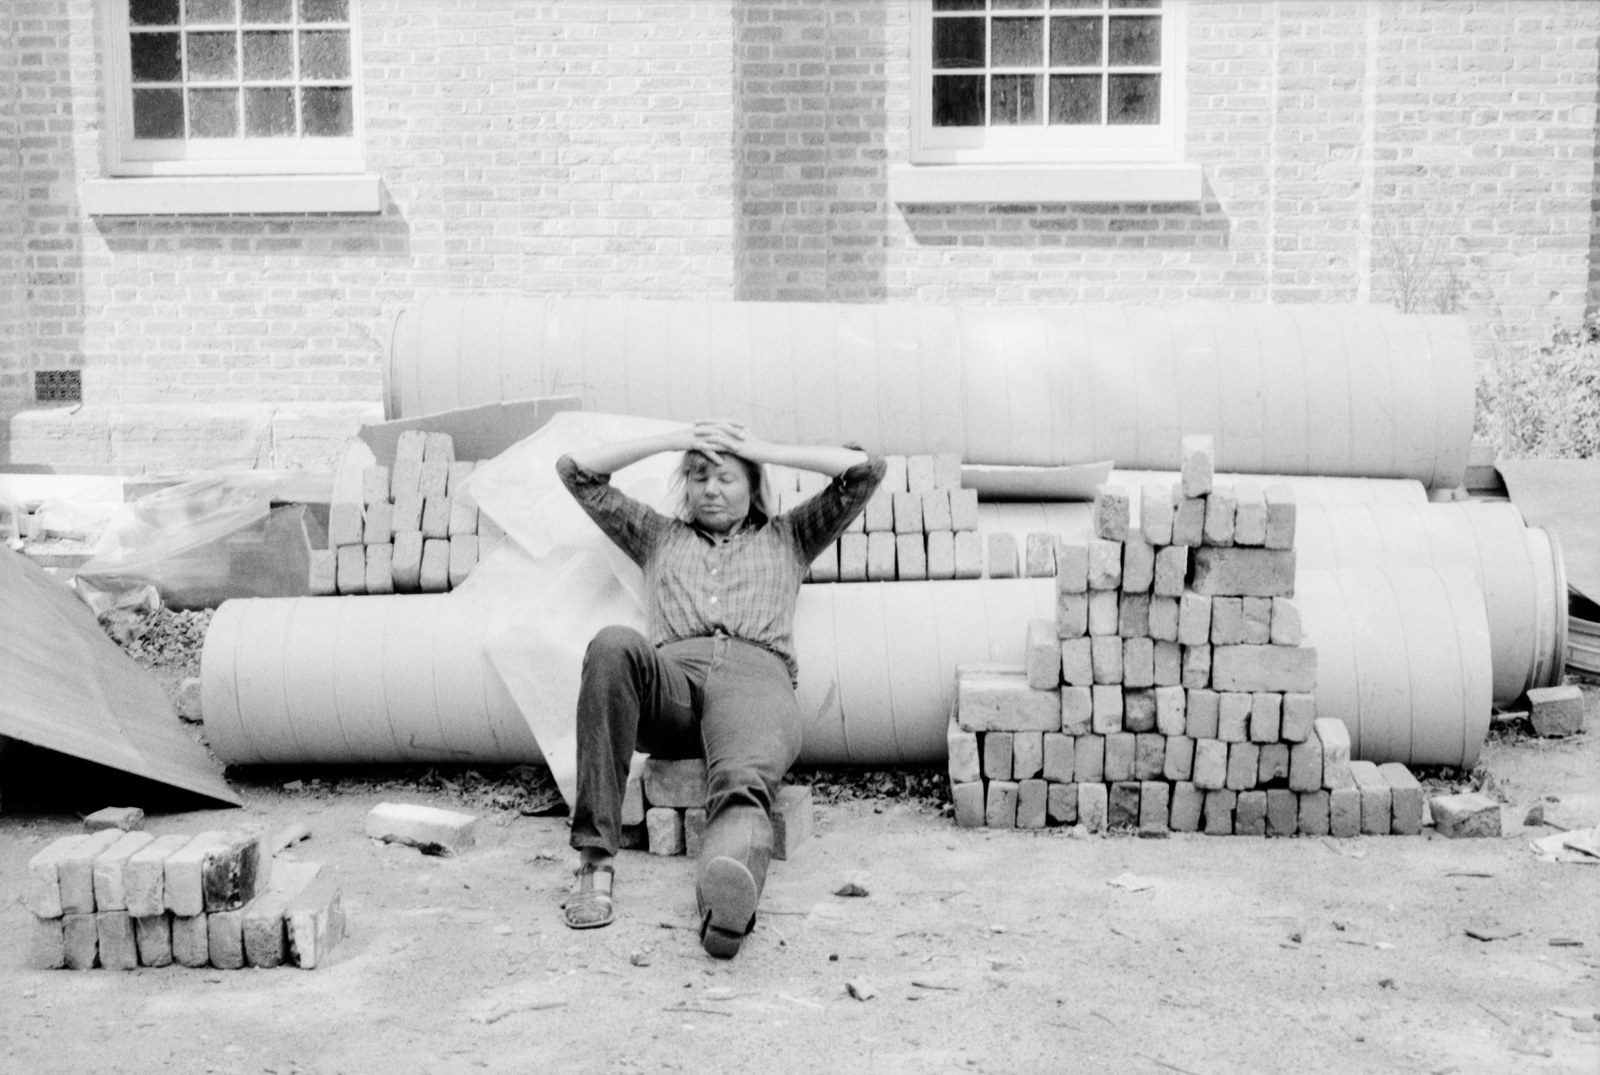 An archaeologist takes a well-earned rest against pipes and convict-made sandstock bricks, Hyde Park Barracks, 1981.